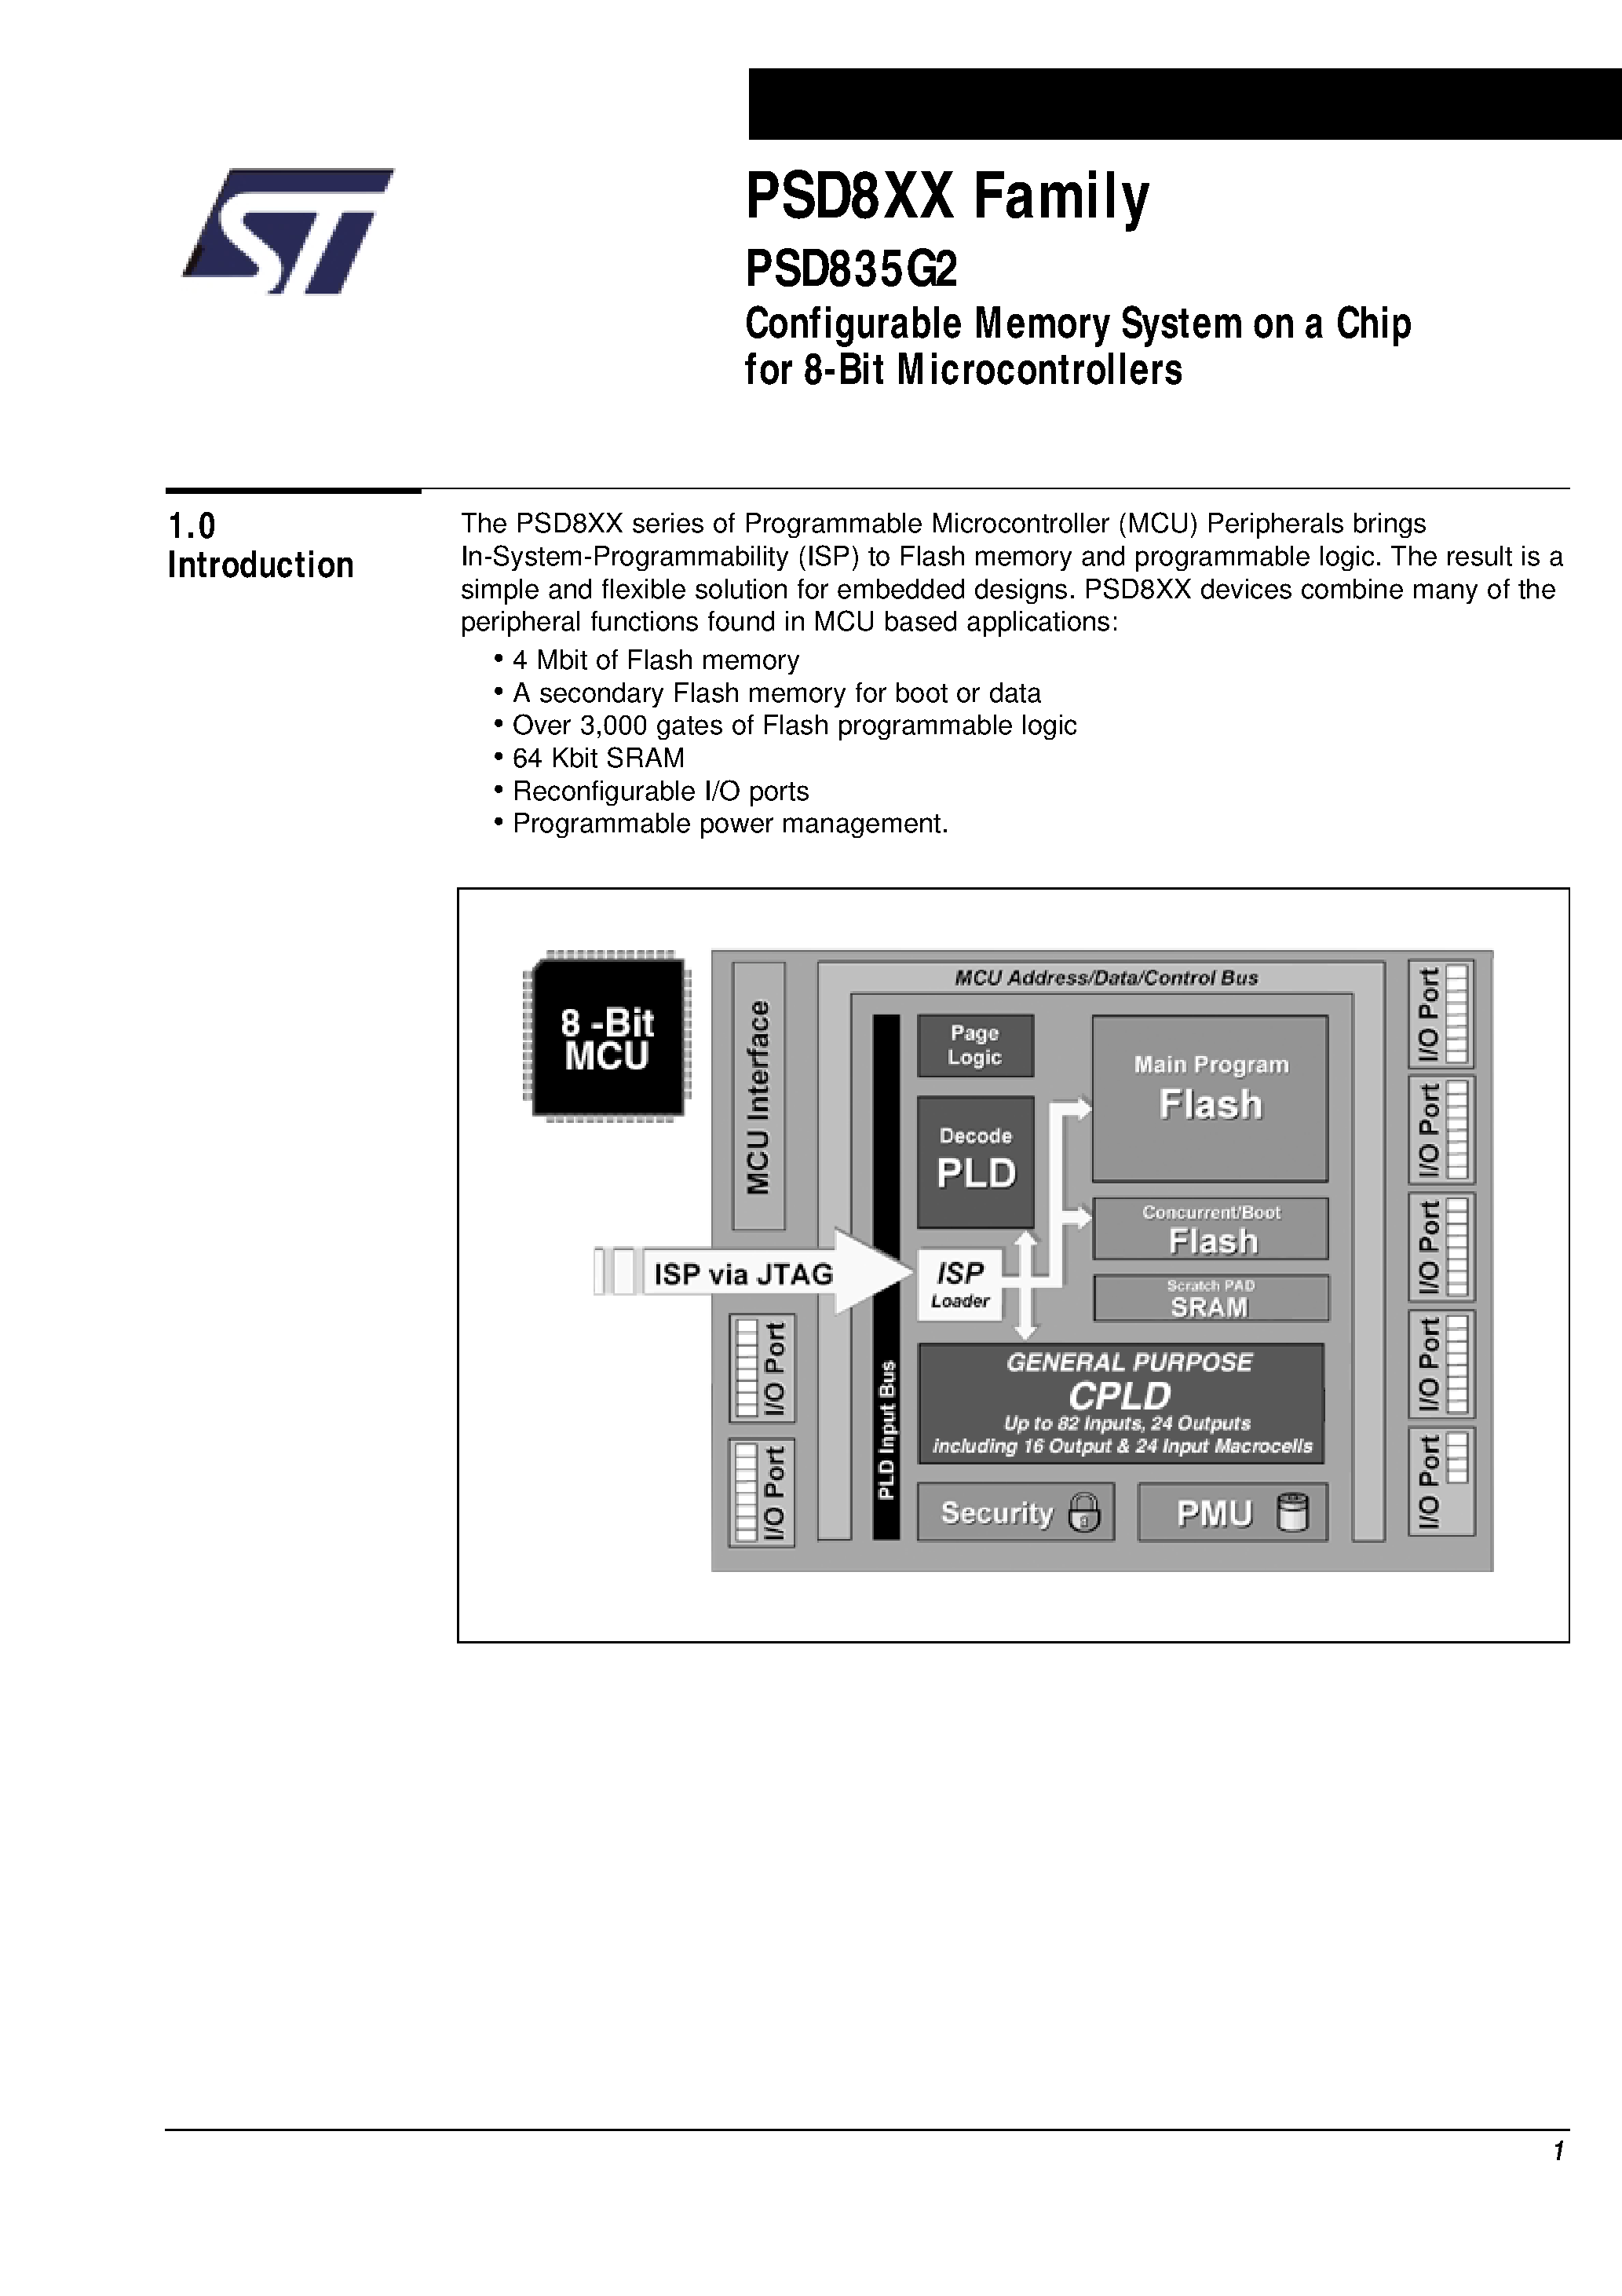 Datasheet PSD835F1-A-70B81I - Configurable Memory System on a Chip for 8-Bit Microcontrollers page 2